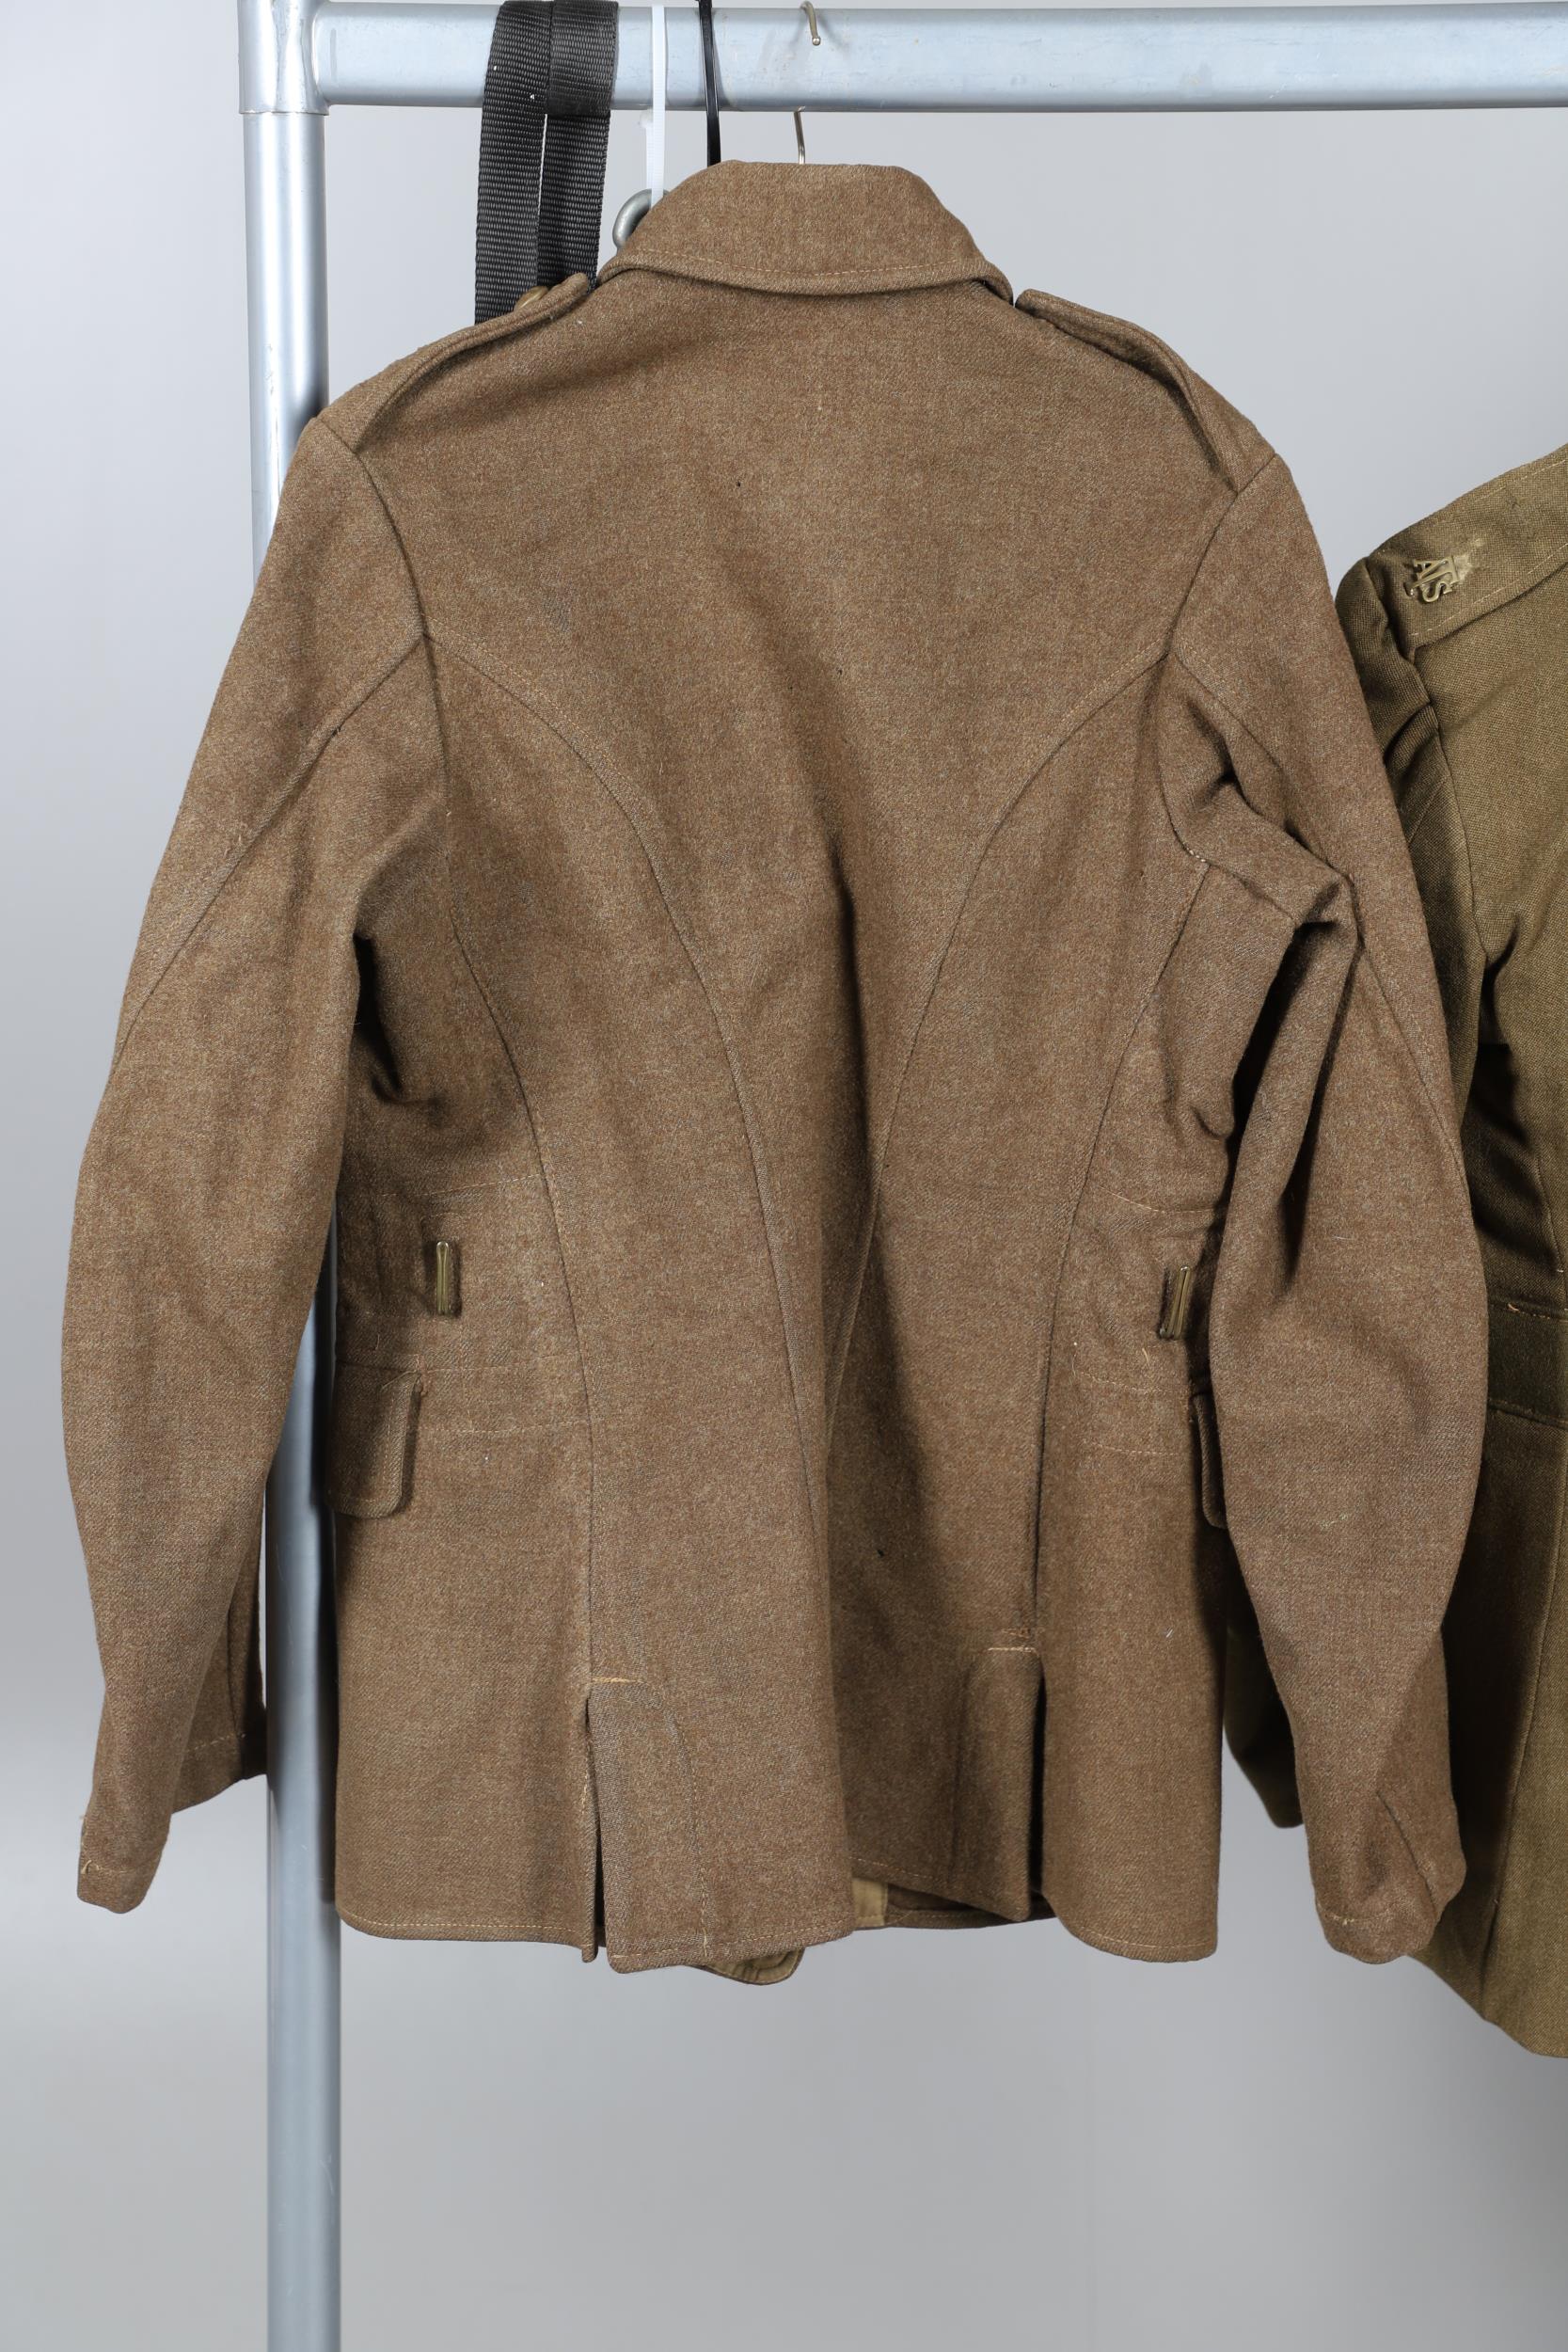 THREE 1922 PATTERN OR SIMILAR JACKETS WITH GENERAL SERVICE BUTTONS. - Image 10 of 12